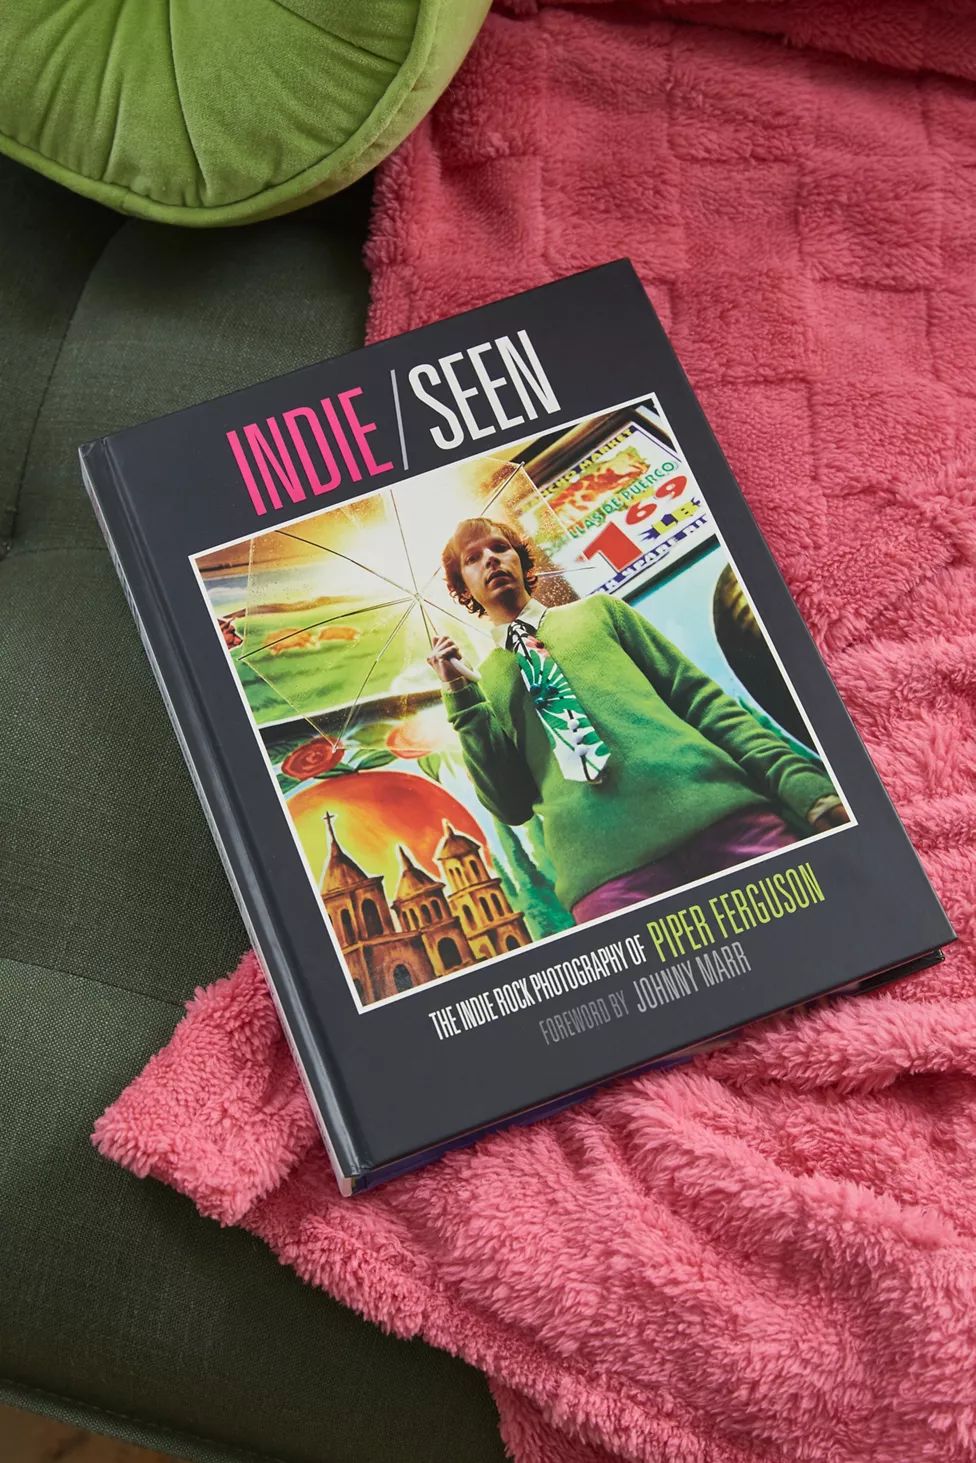 Indie, Seen: The Indie Rock Photography Of Piper Ferguson By Piper Ferguson & Johnny Marr | Urban Outfitters (US and RoW)